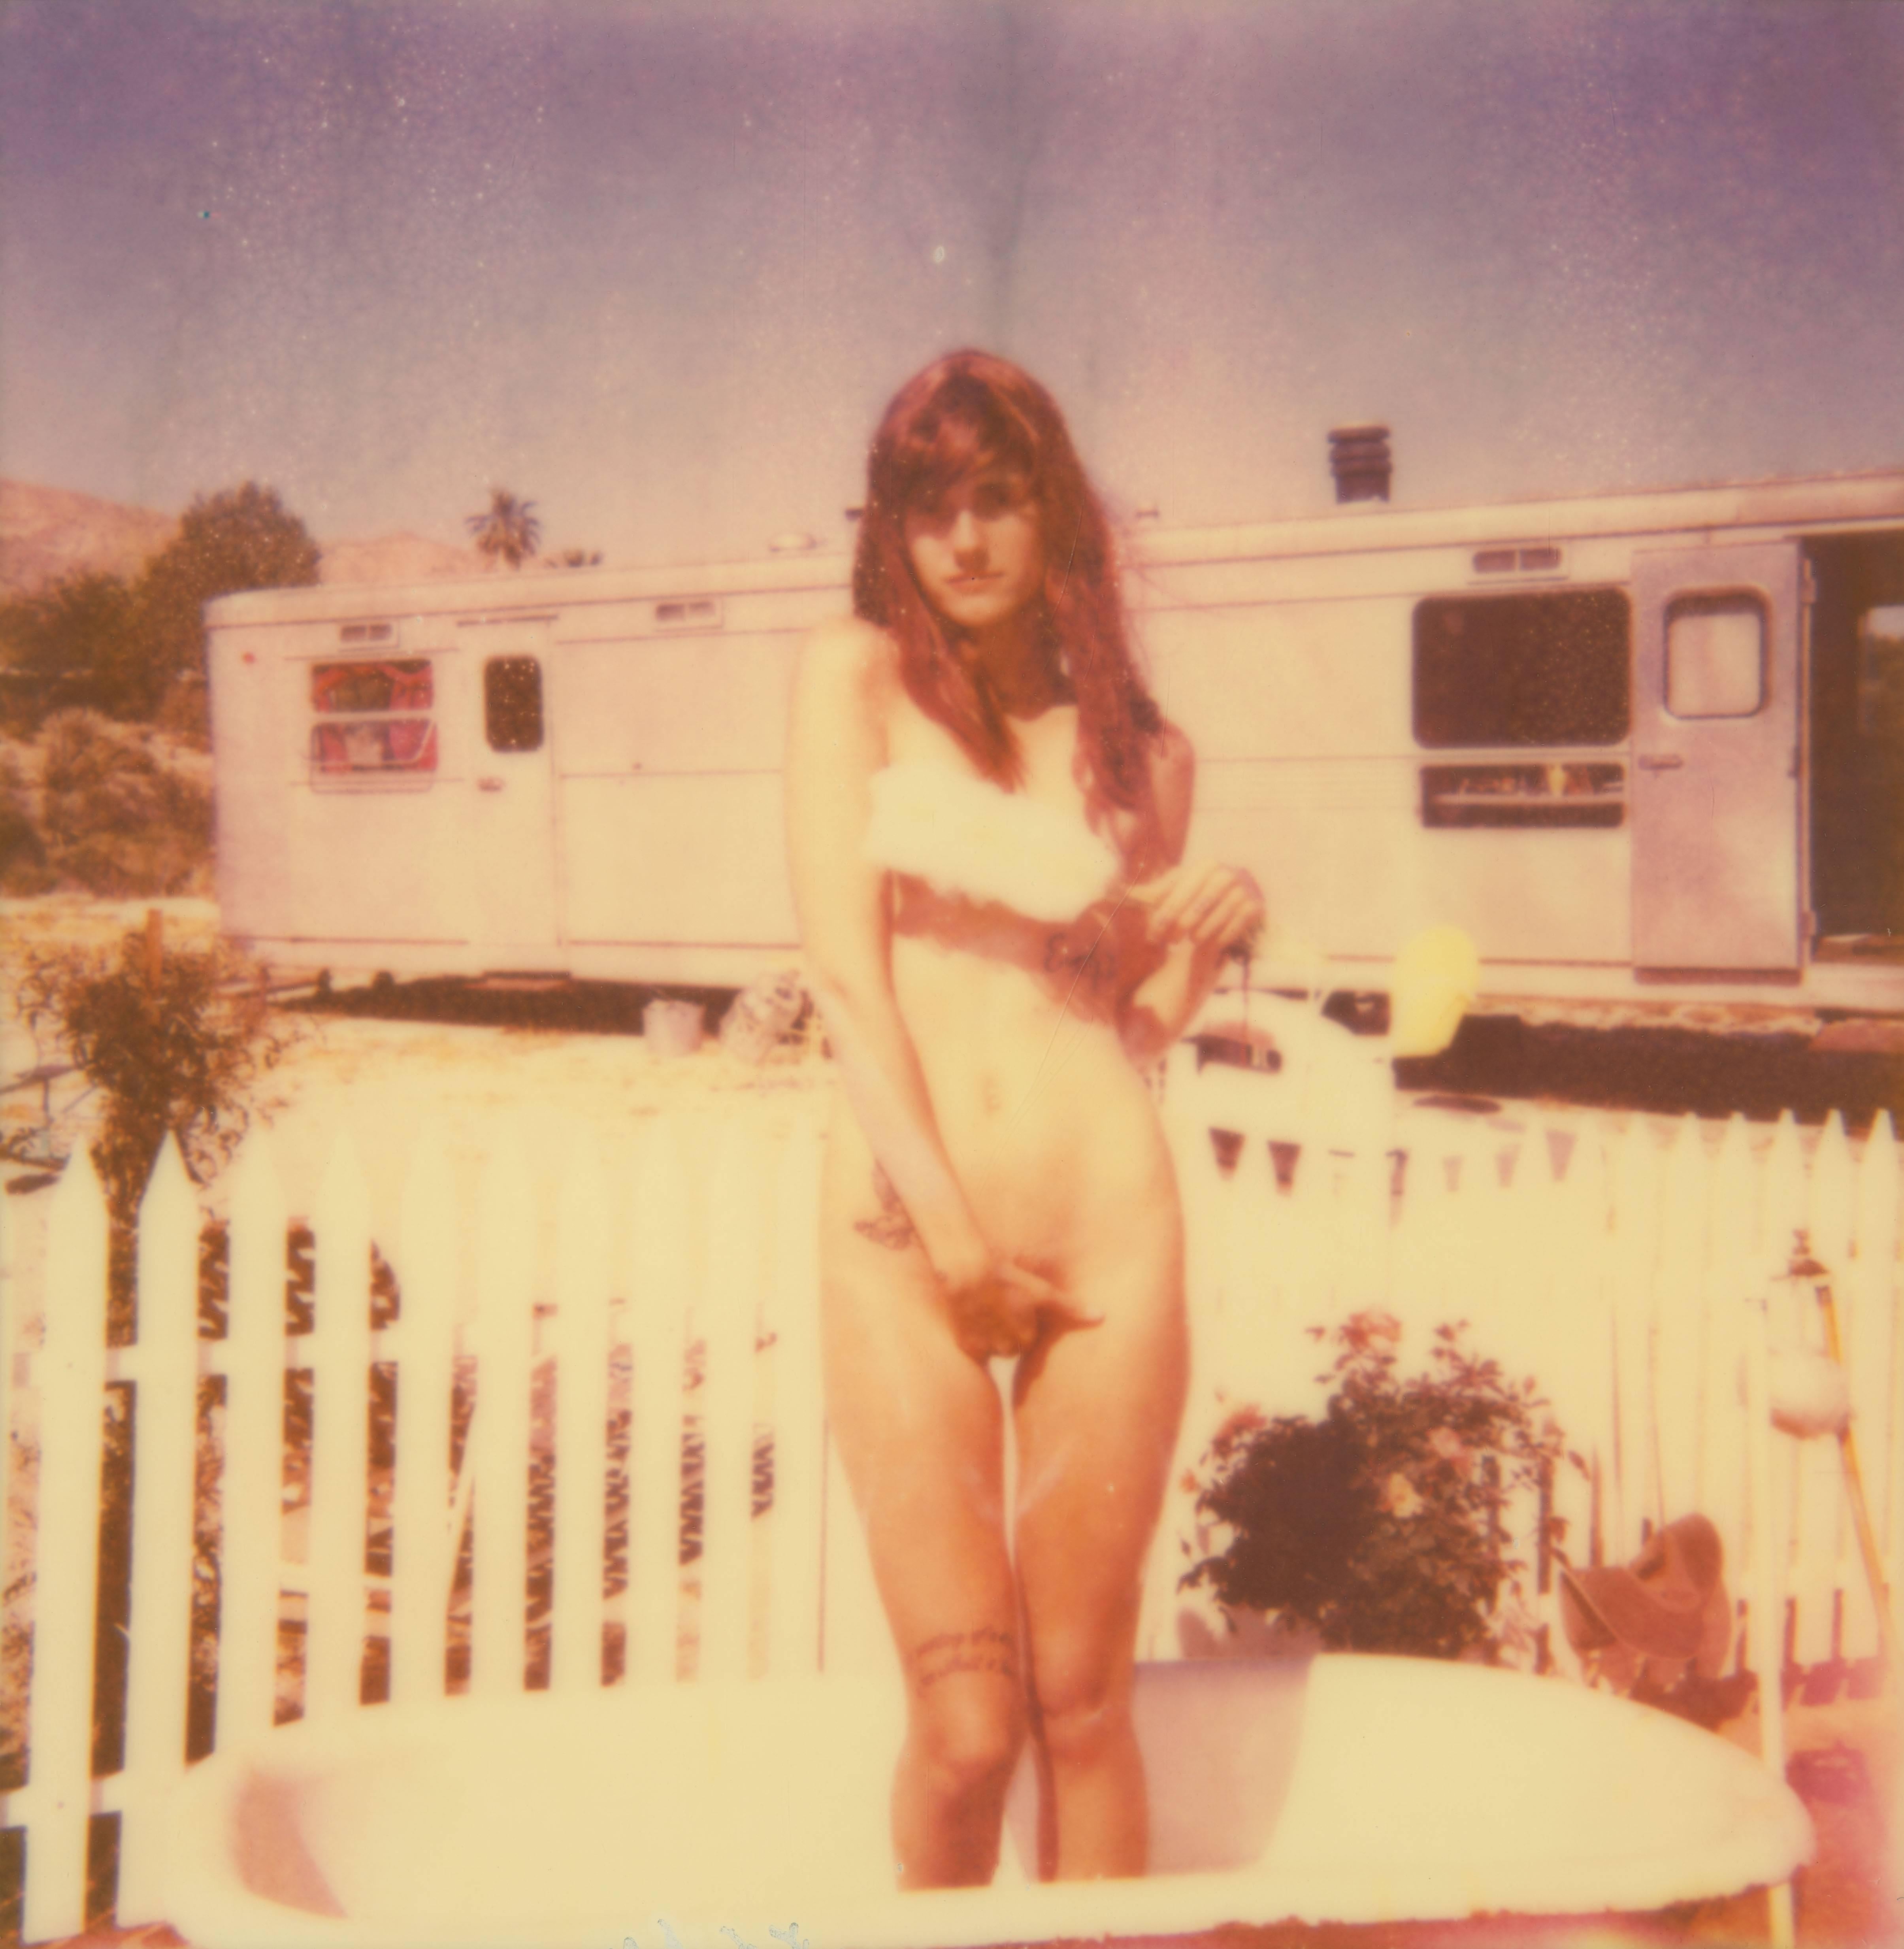 Stefanie Schneider Color Photograph - The Girl II (The Girl behind the White Picket Fence)